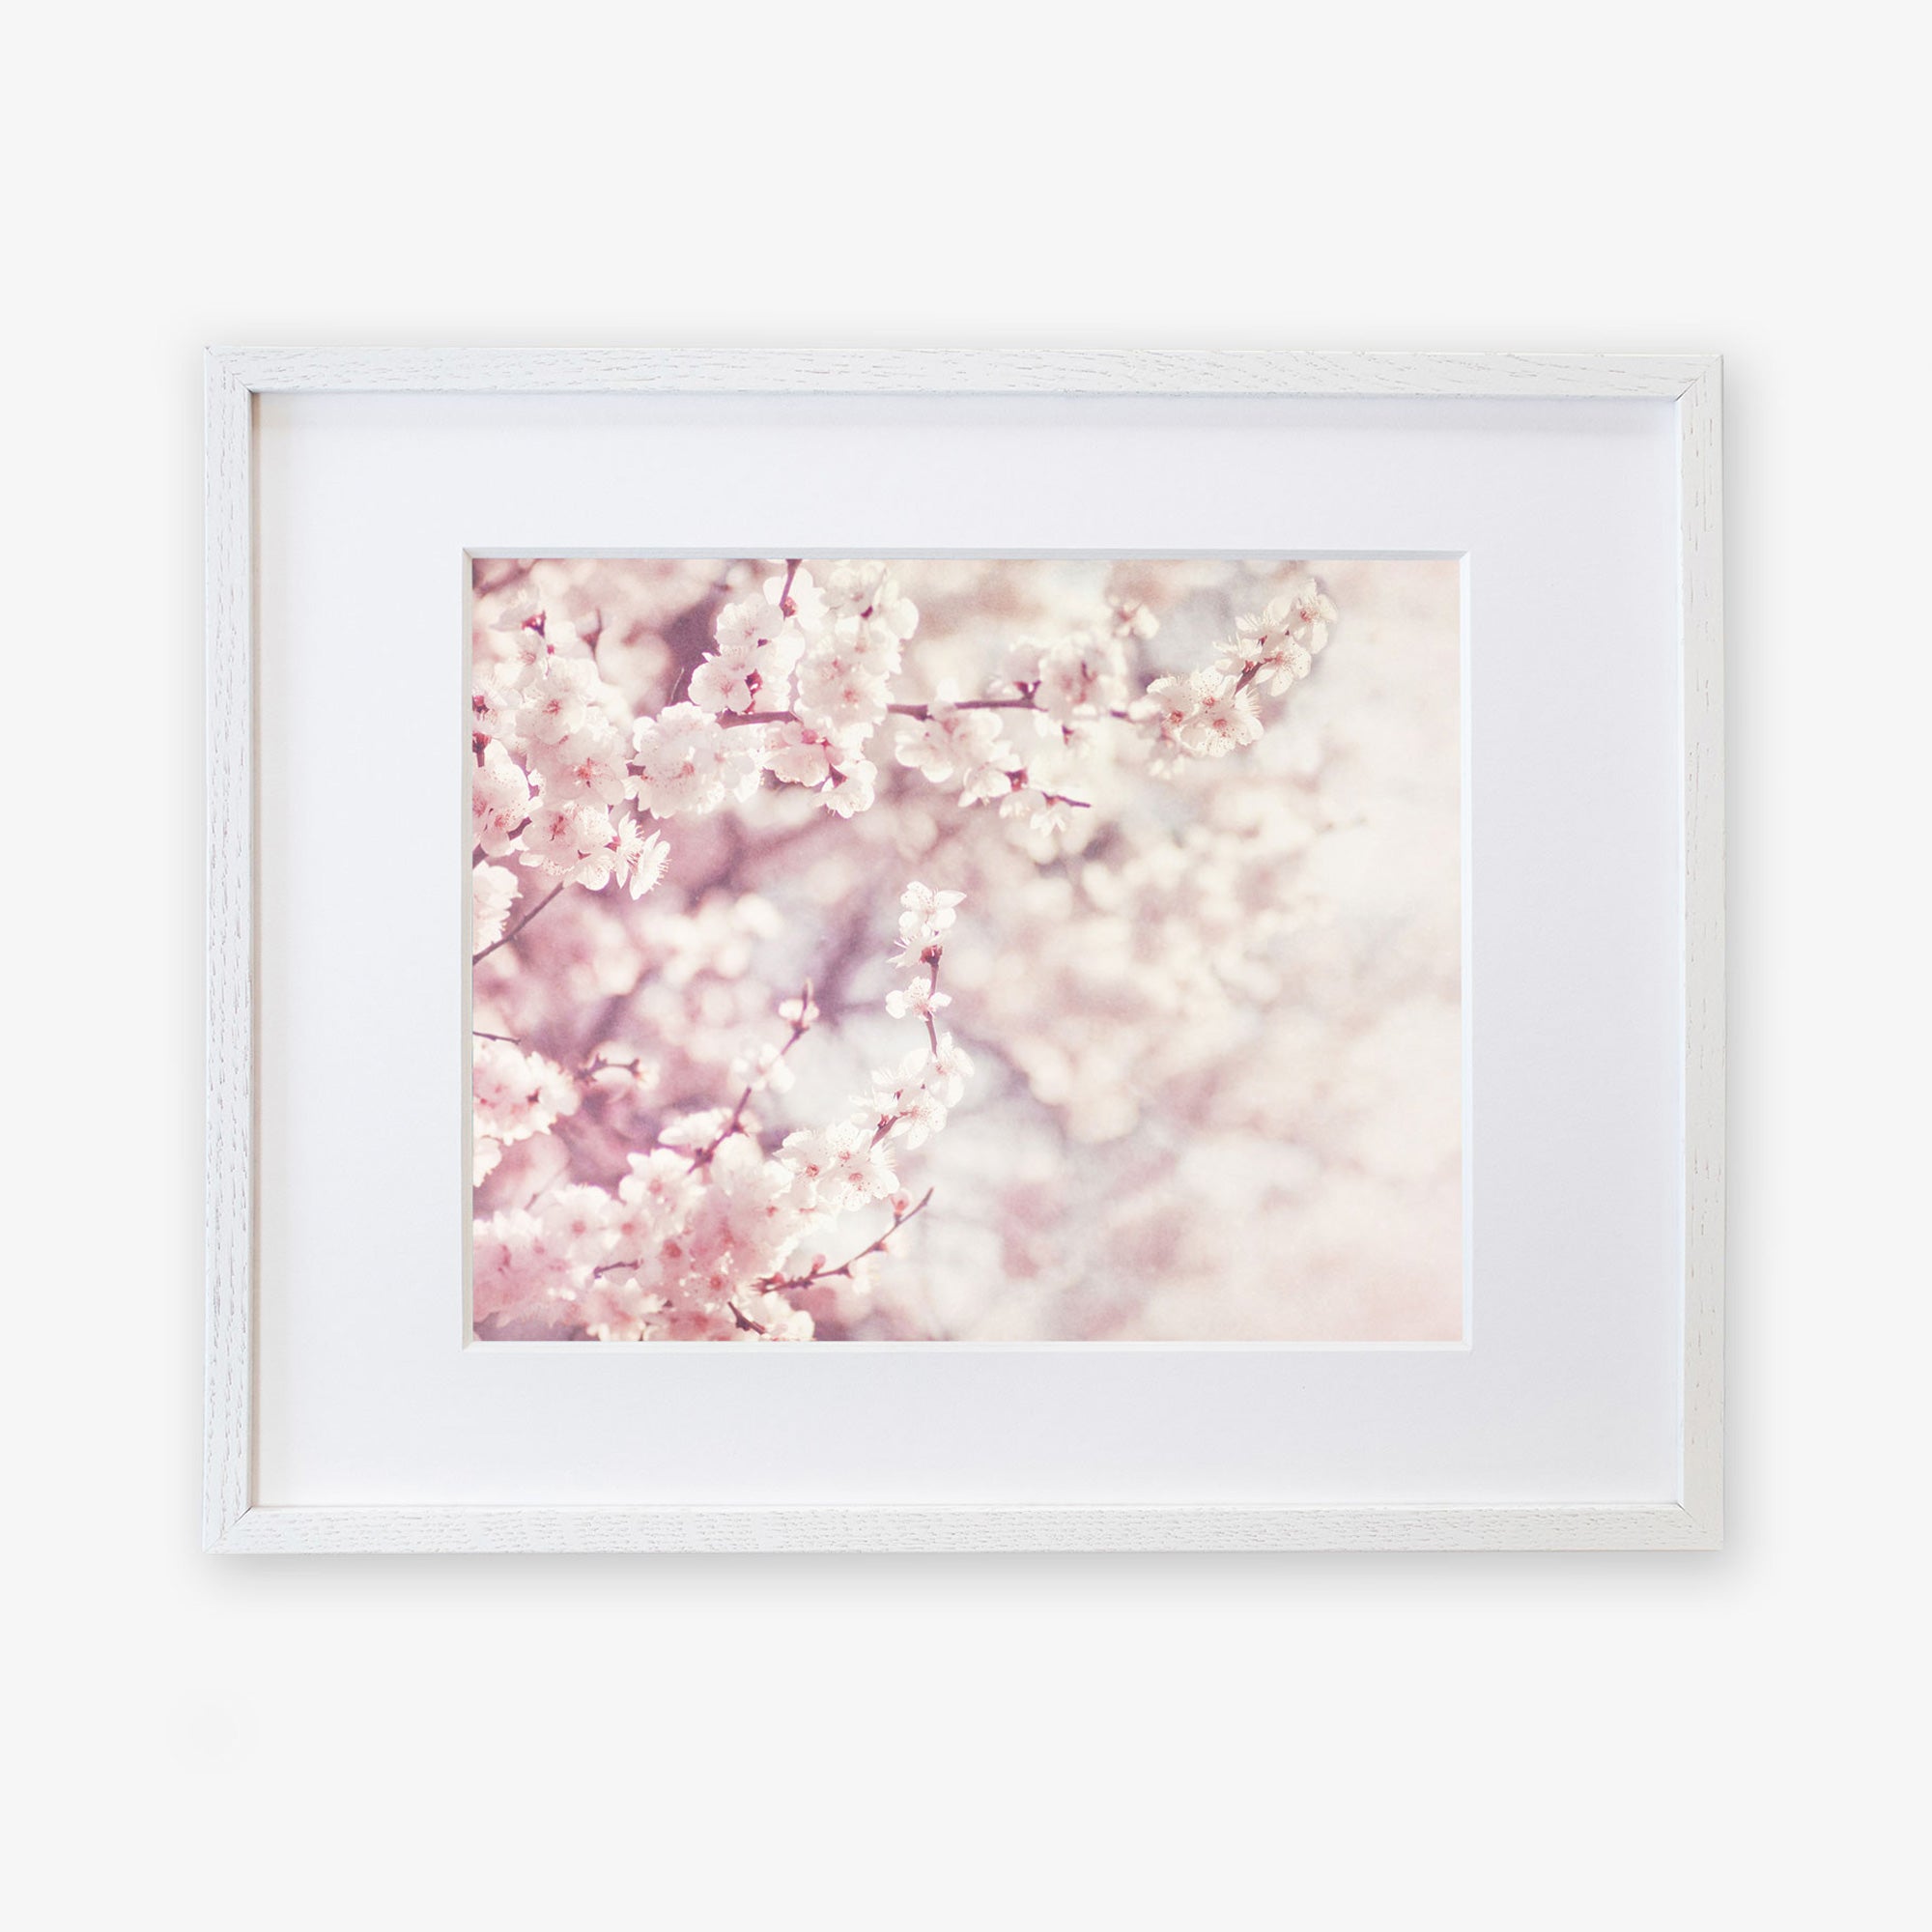 A framed photograph of cherry blossoms in full bloom, printed on archival photographic paper, featuring soft pink colors and delicate flowers densely clustered along the branches, displayed against a blurred background - Offley Green&#39;s Pink Floral Print, &#39;Dreamy Blossom&#39;.